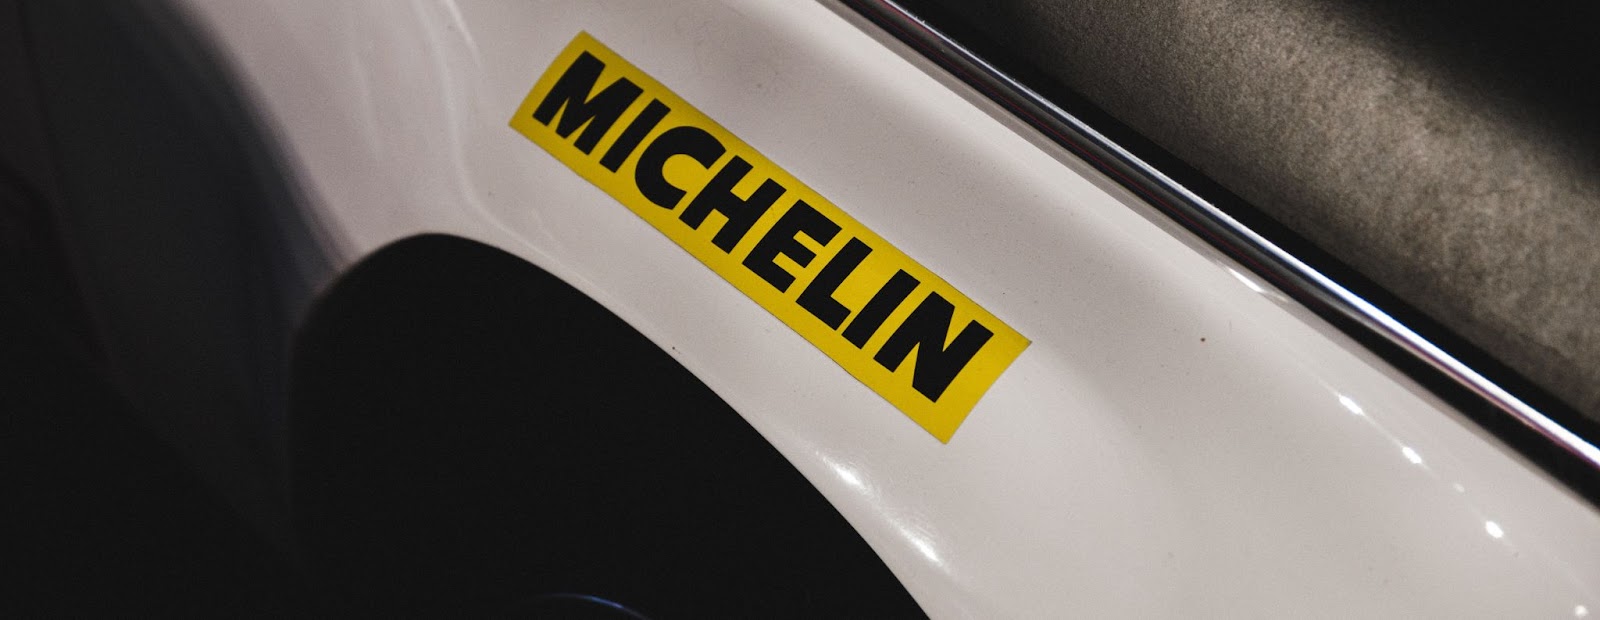 A close-up picture of the Michelin tire brand logo